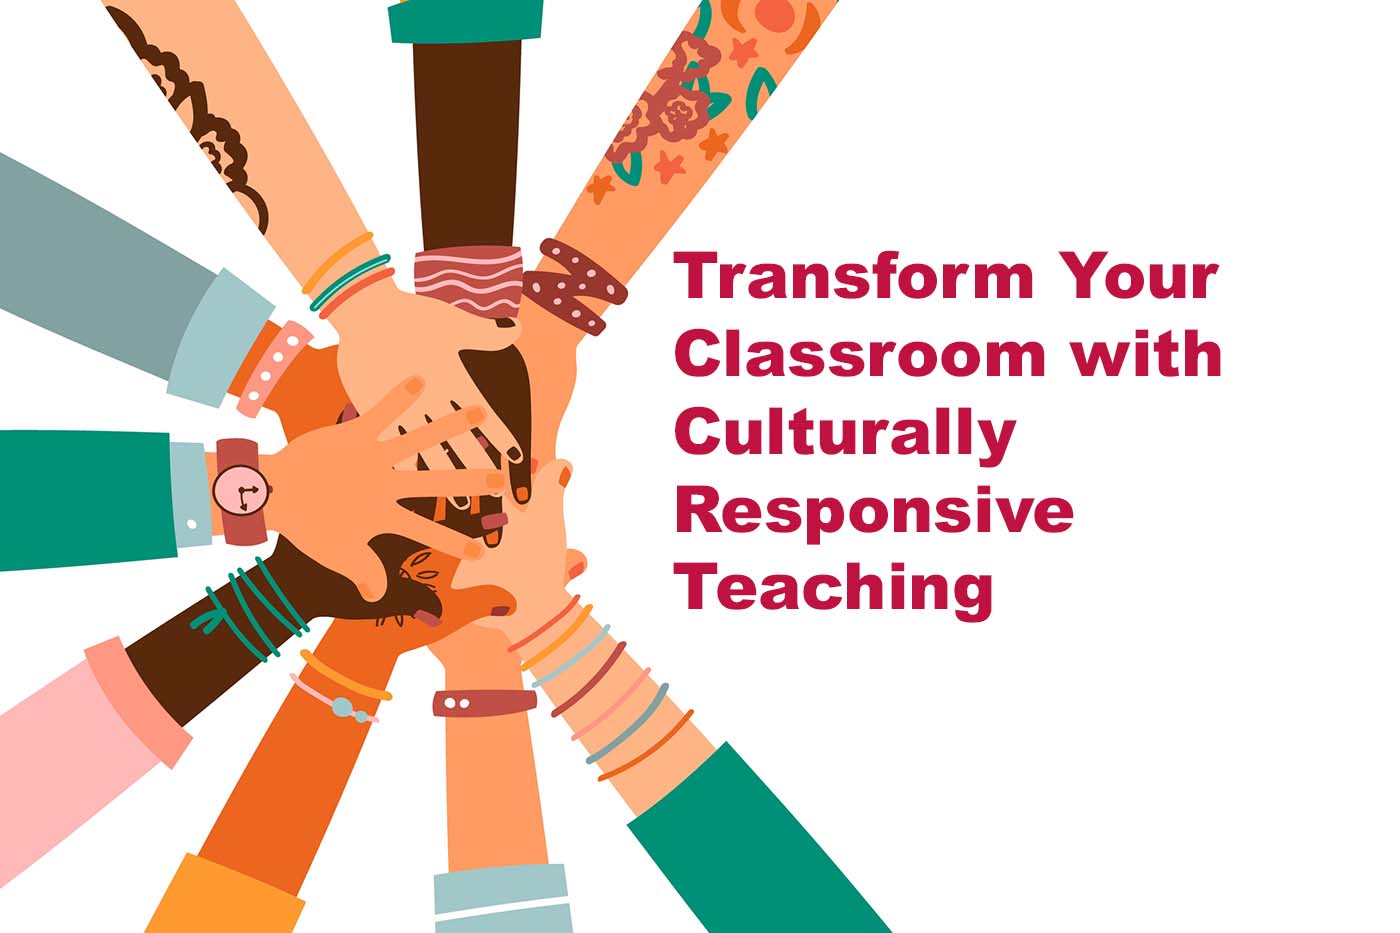 The impact of culturally responsive teaching on student achievement